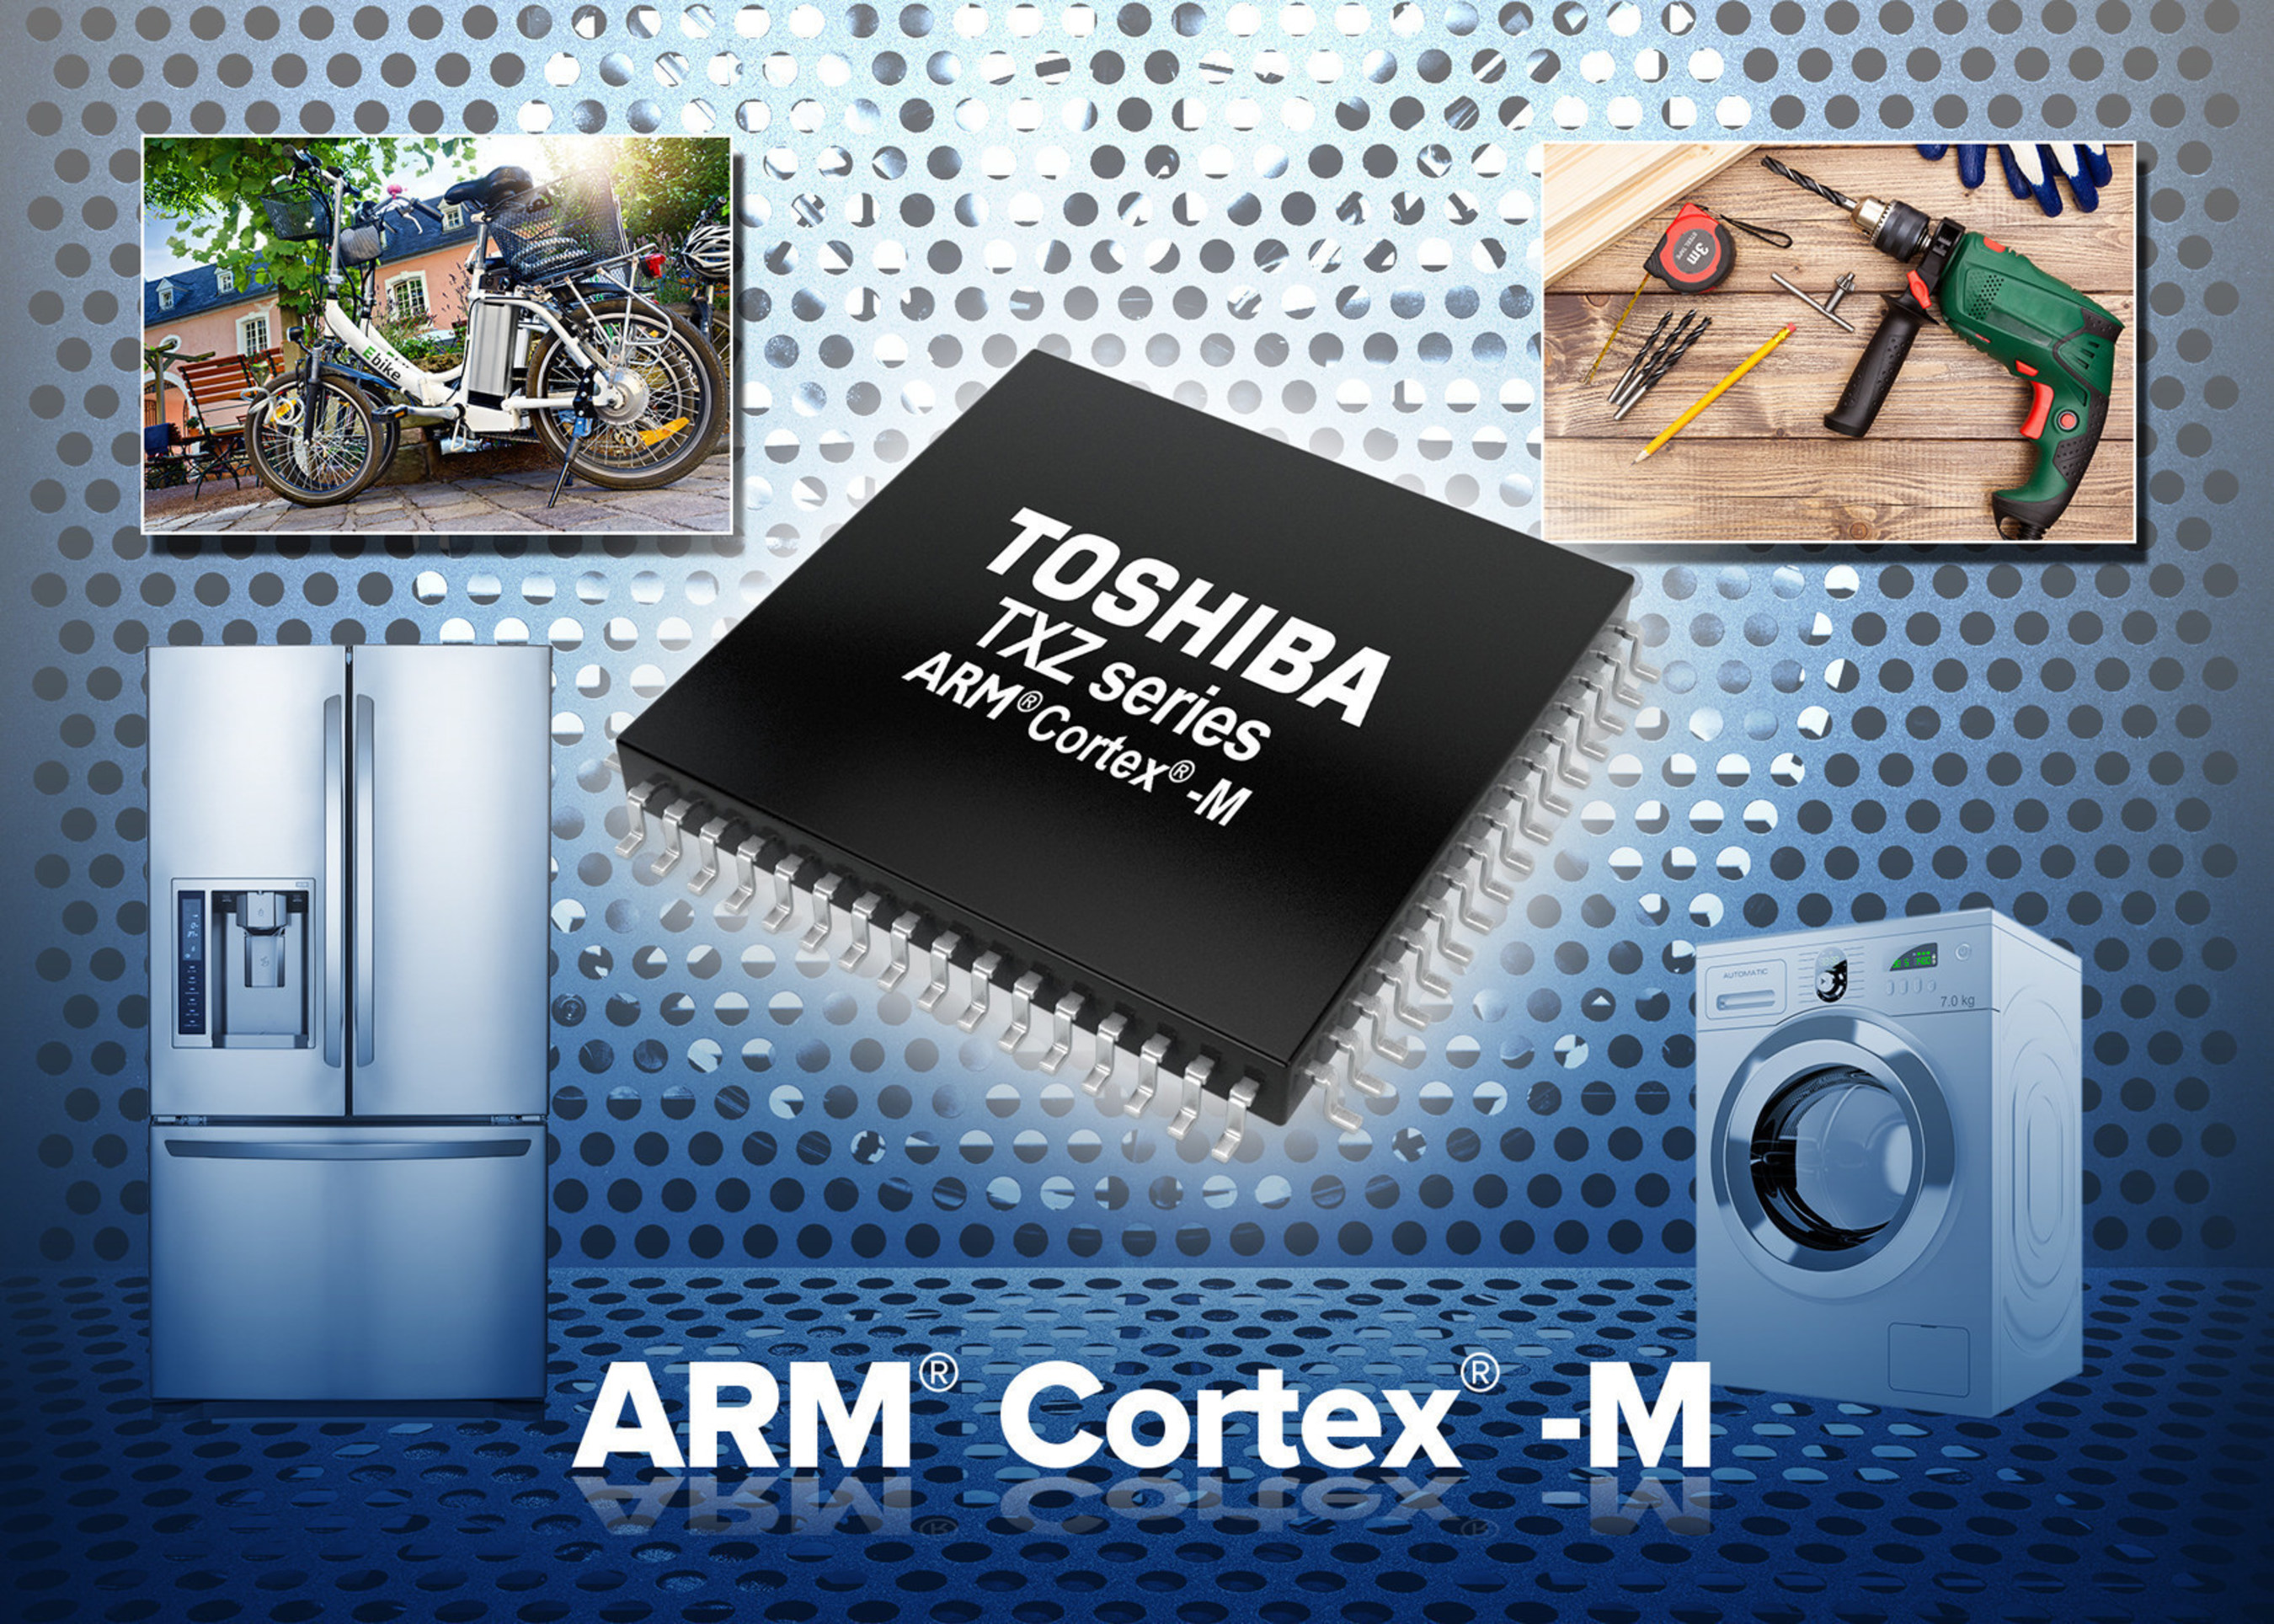 The M4K products in Toshiba's TXZ family of high-speed, low power consumption microcontrollers feature Vector Engine technology for multiple-motor control.